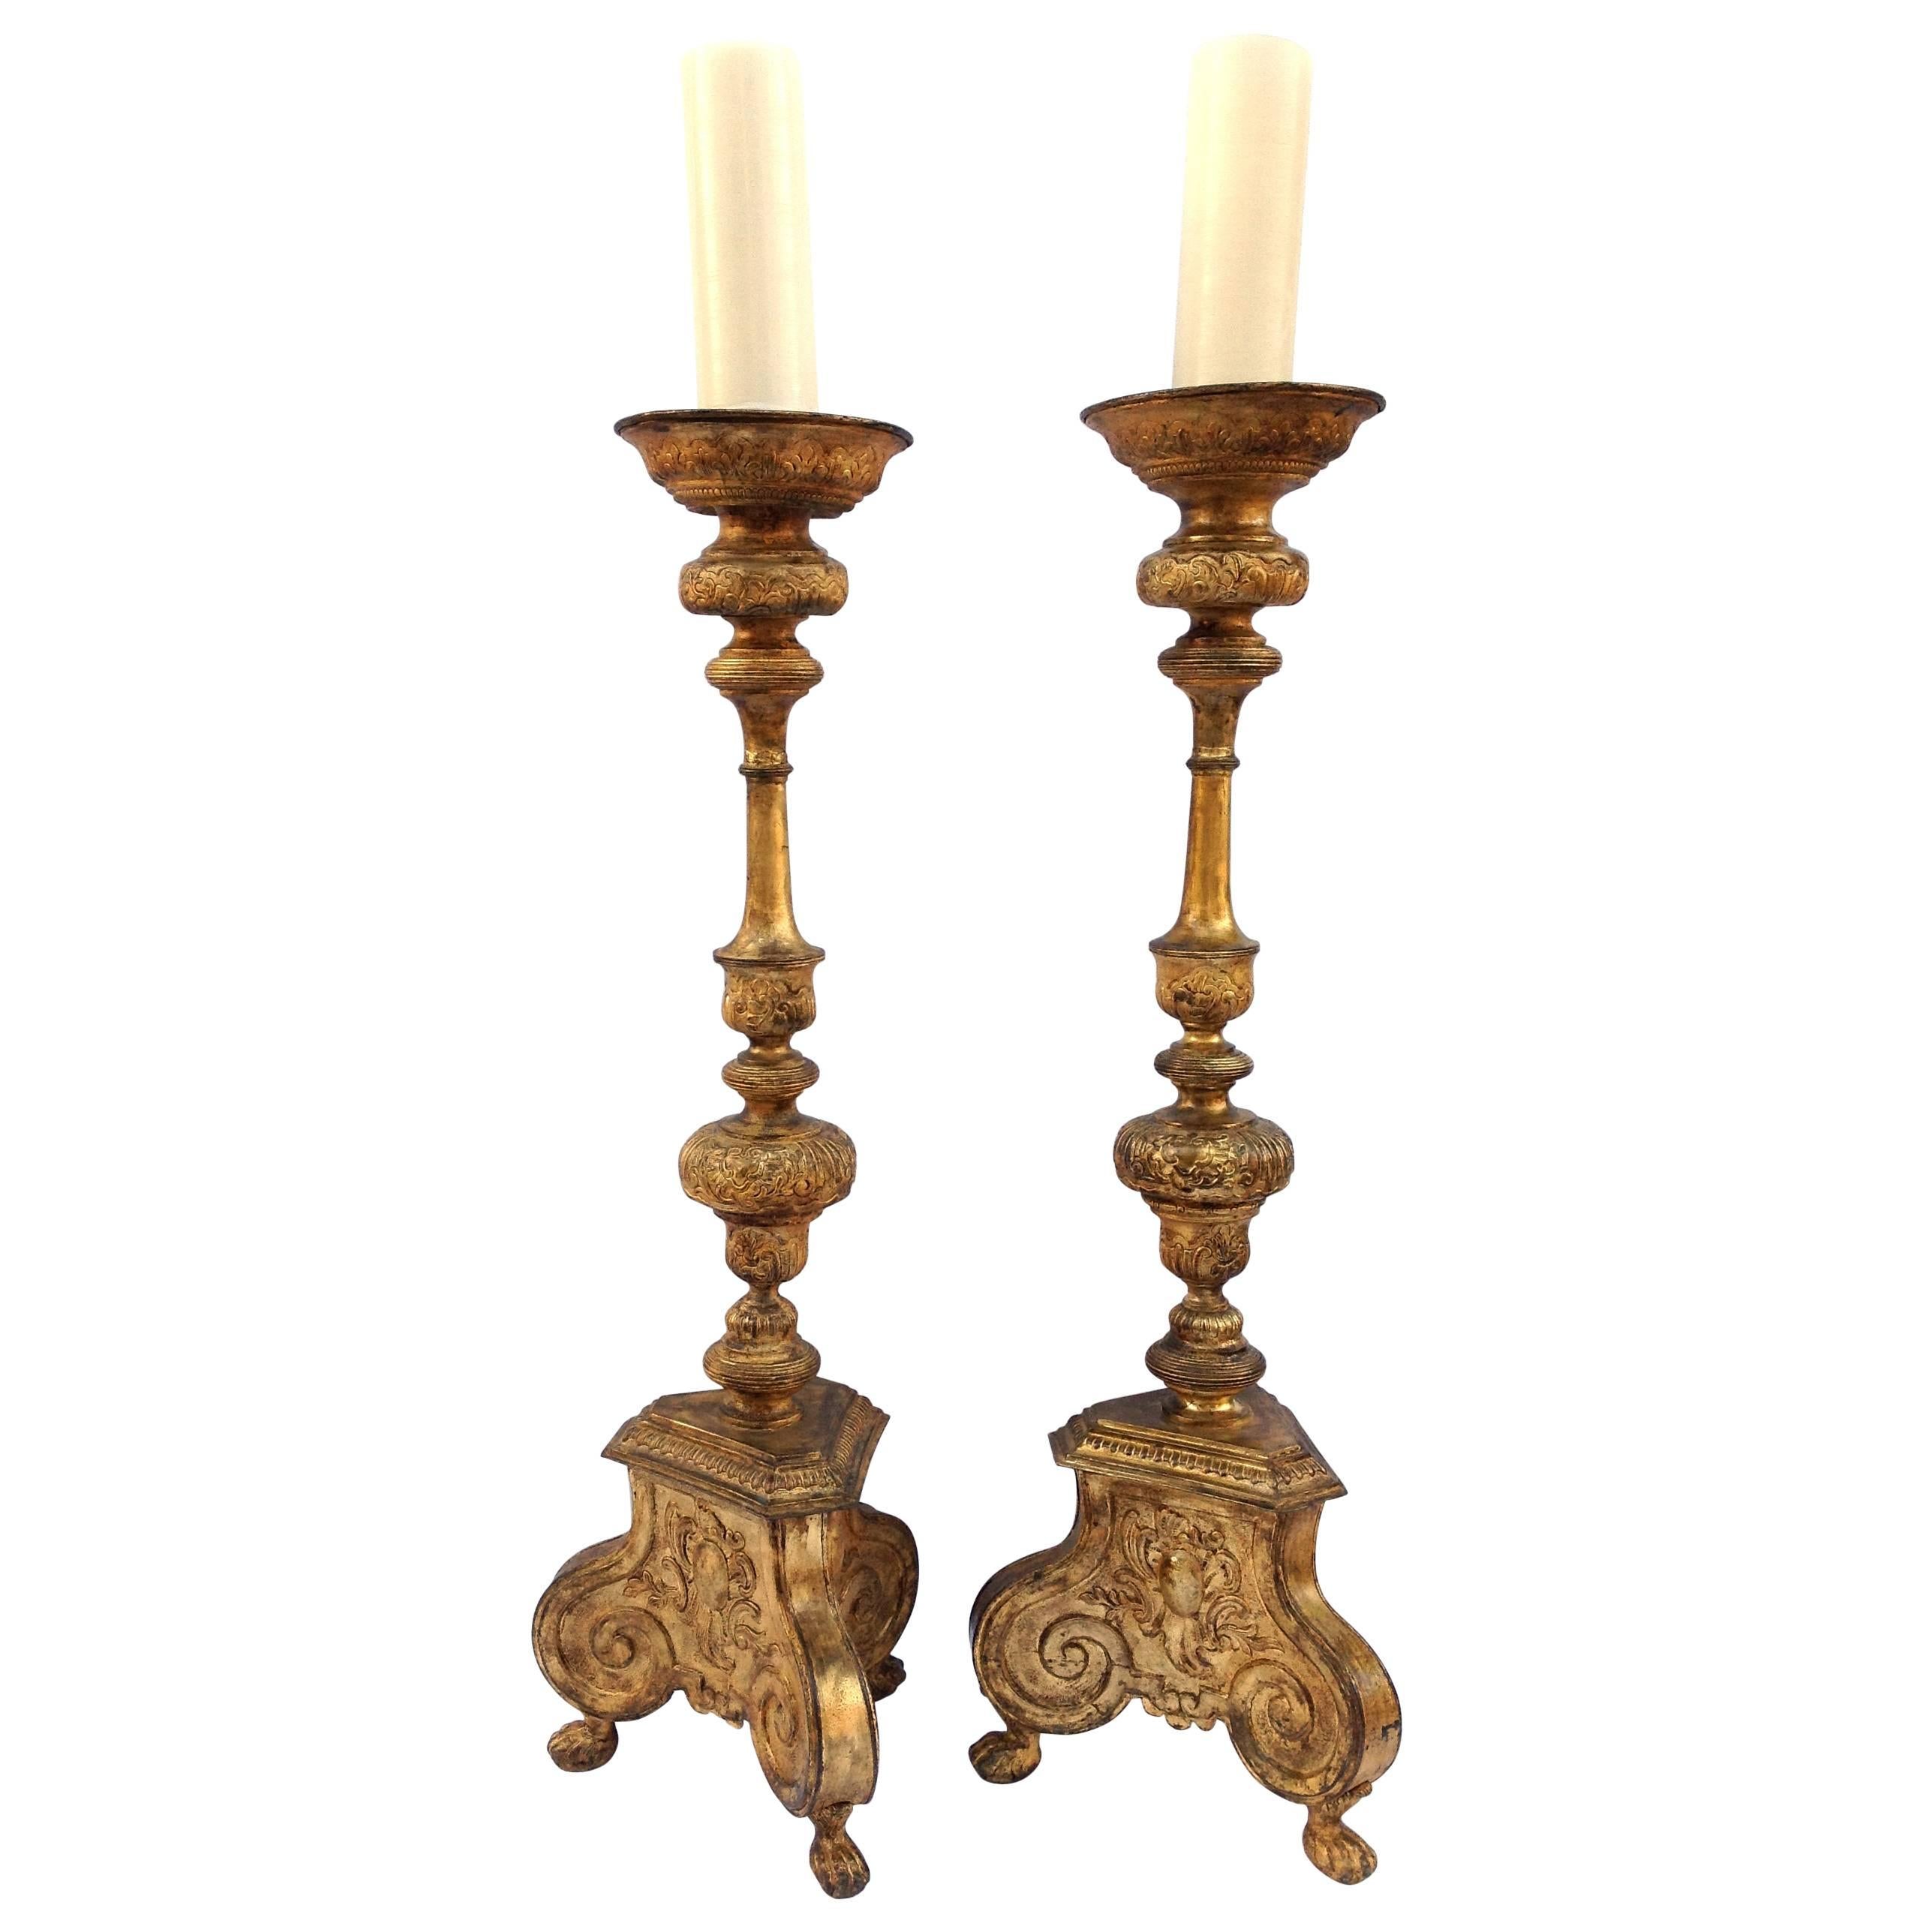 Pair of Large Candleholders, Embossed and Gilded Metal, Italy, 19th Century